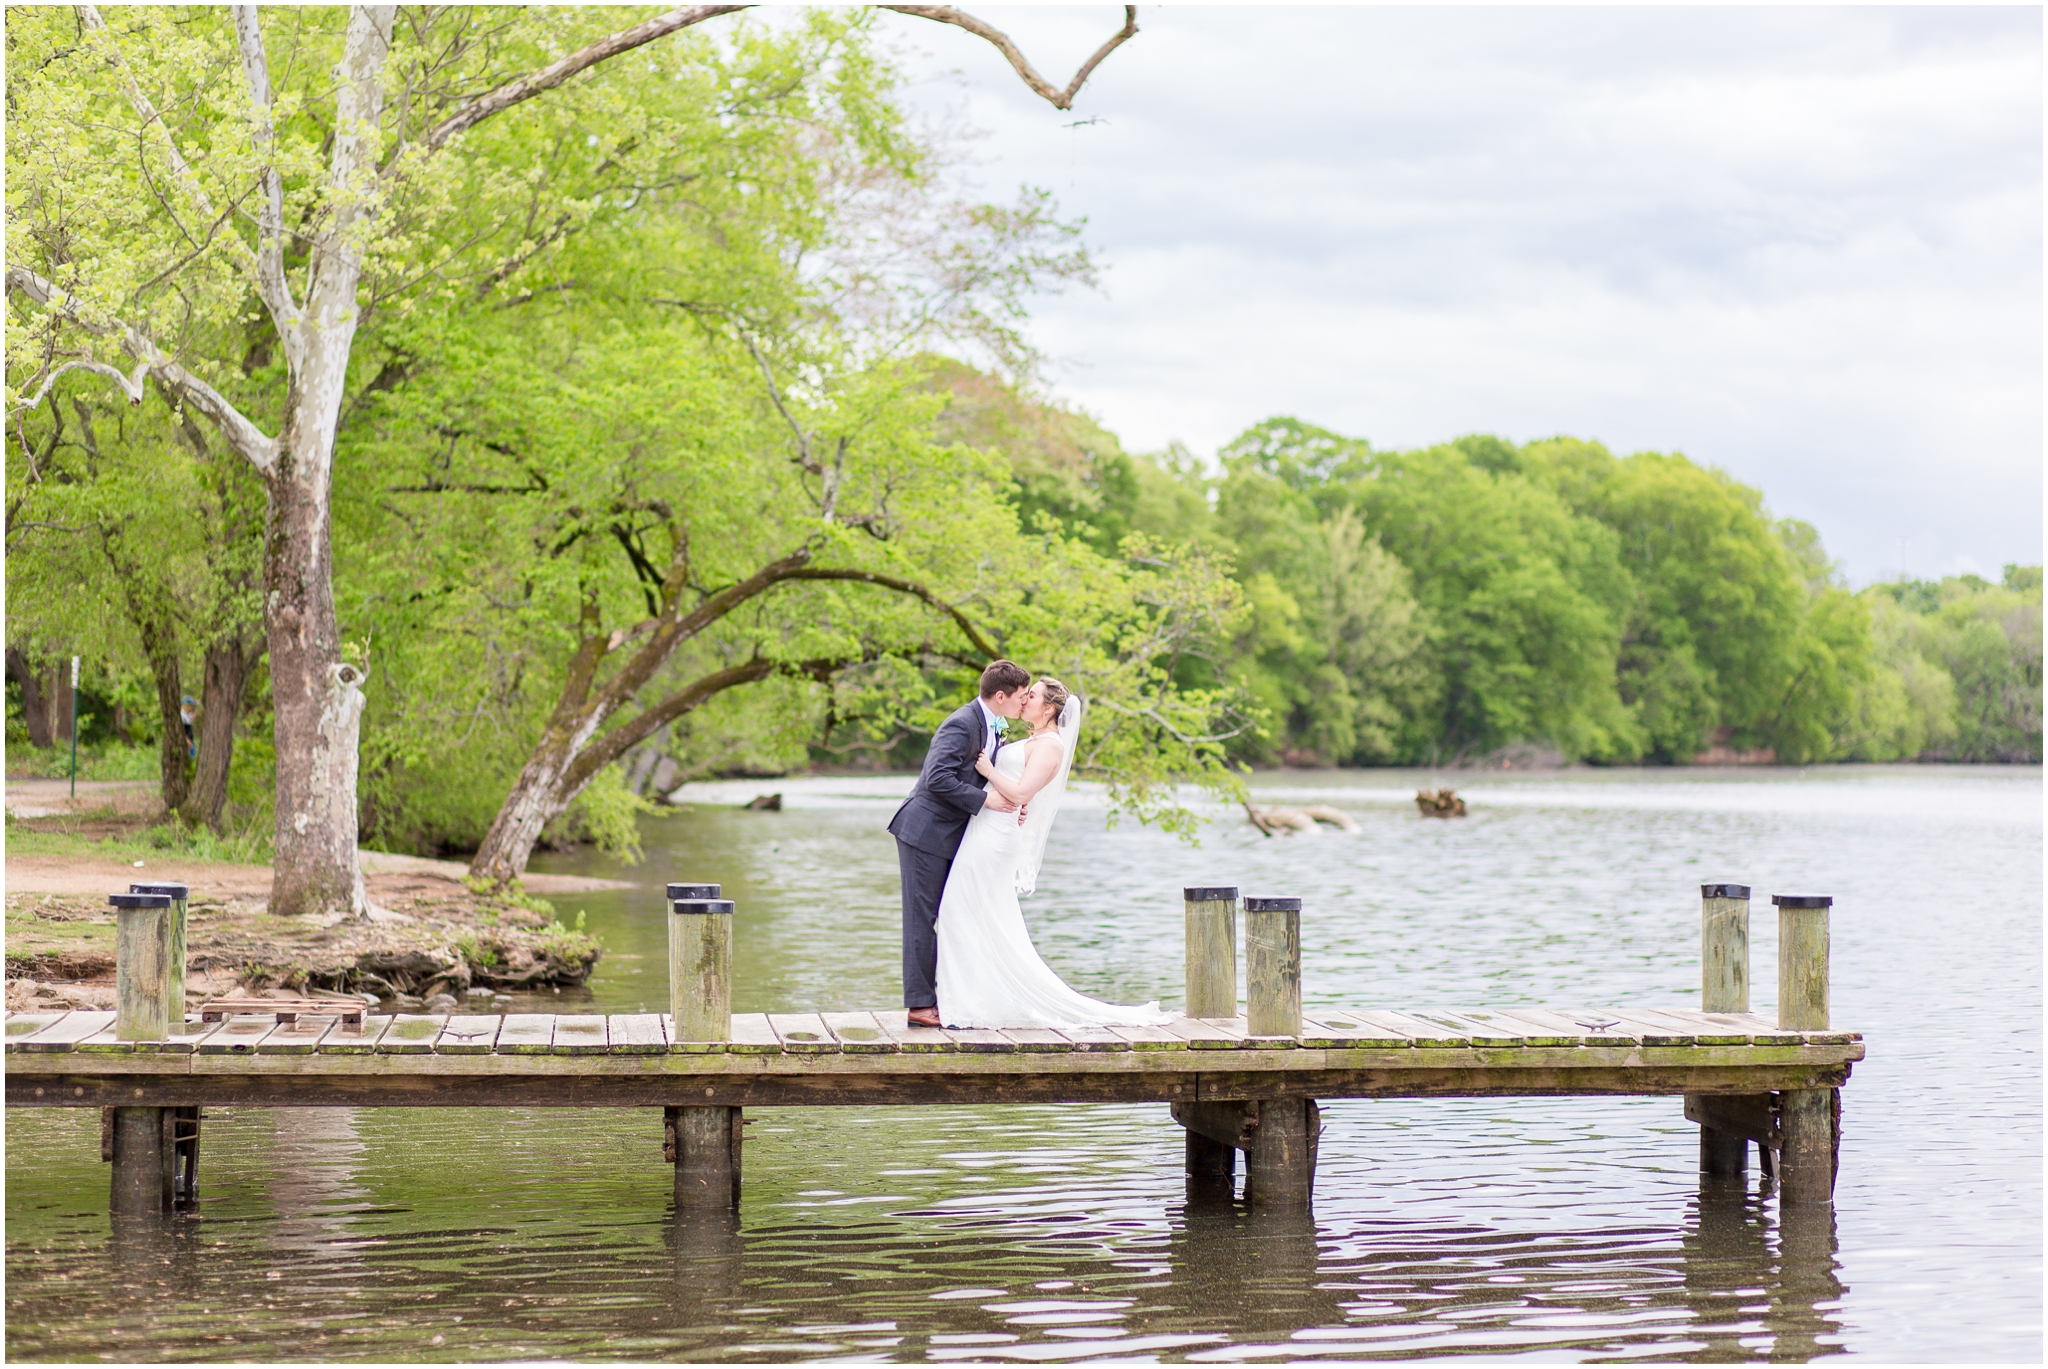 This River View at Occoquan wedding included unique centerpieces, ethical wedding vendors, and took place at one of the most beautiful virginia wedding venues. DC wedding photographer Taylor Rose Photography captured this charitable wedding as a wedding photographer who gives back to A21 to bring hope from human trafficking. Mallory Rood helped plan All the Dainty Details.